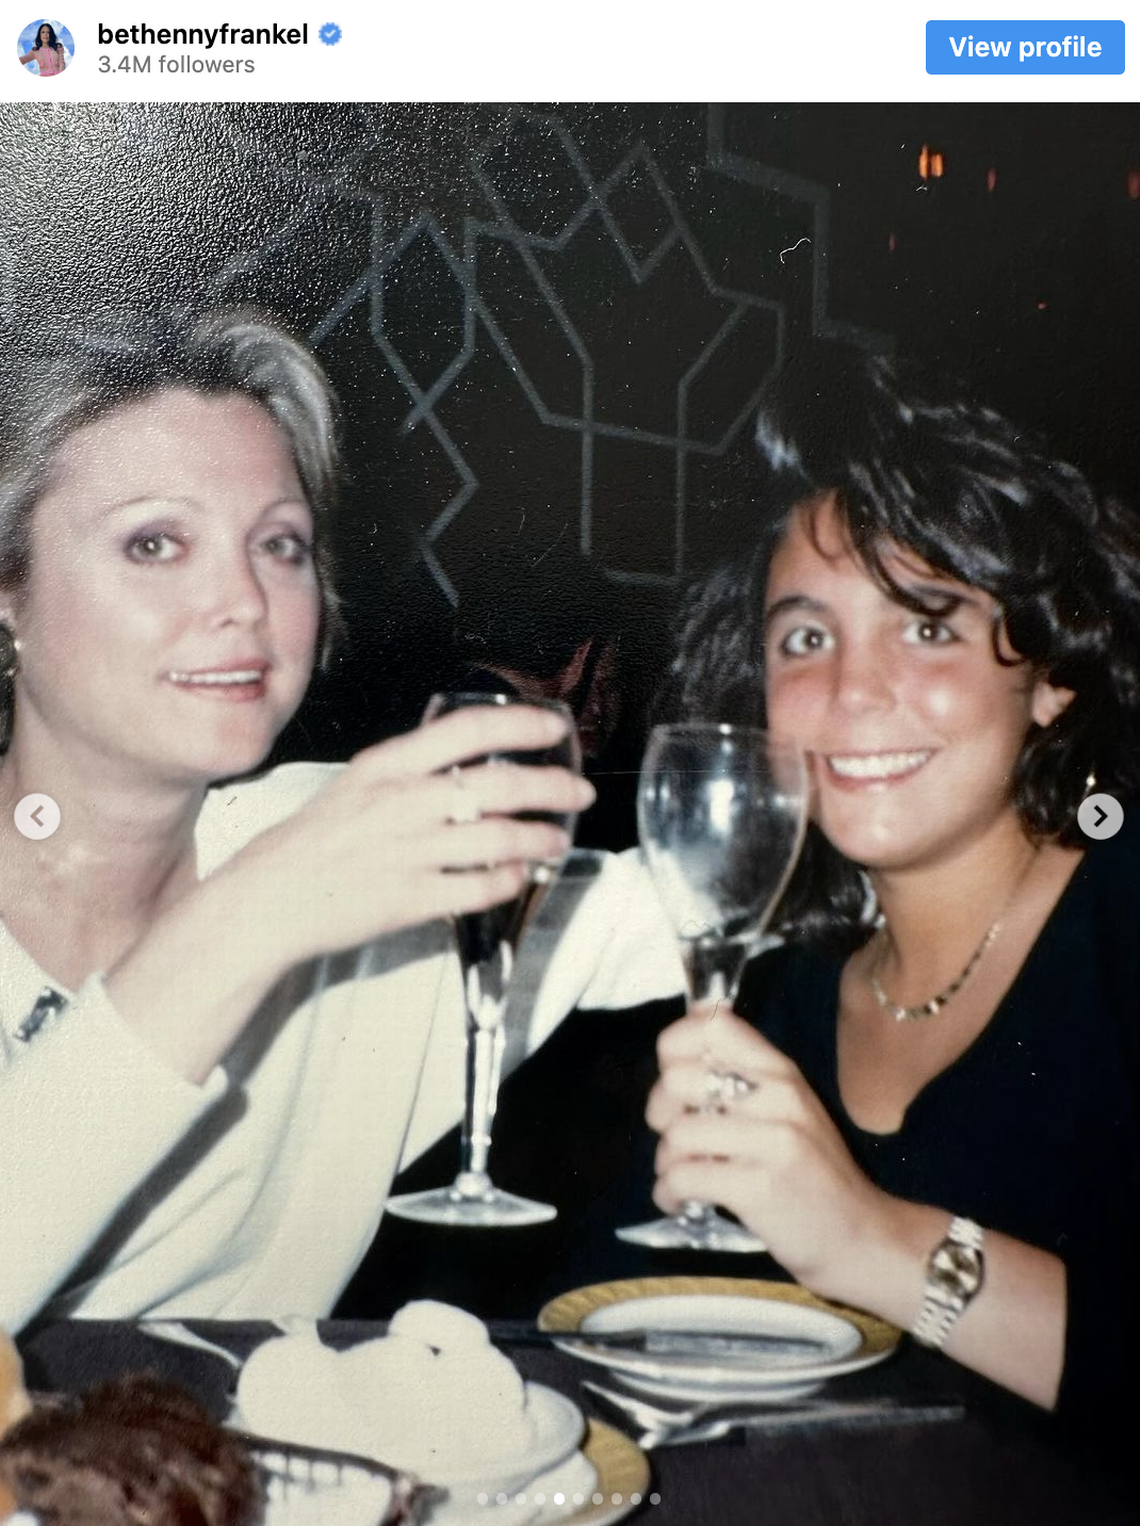 Reality star and entrepreneur Bethenny Frankel has shared her mom has passed away